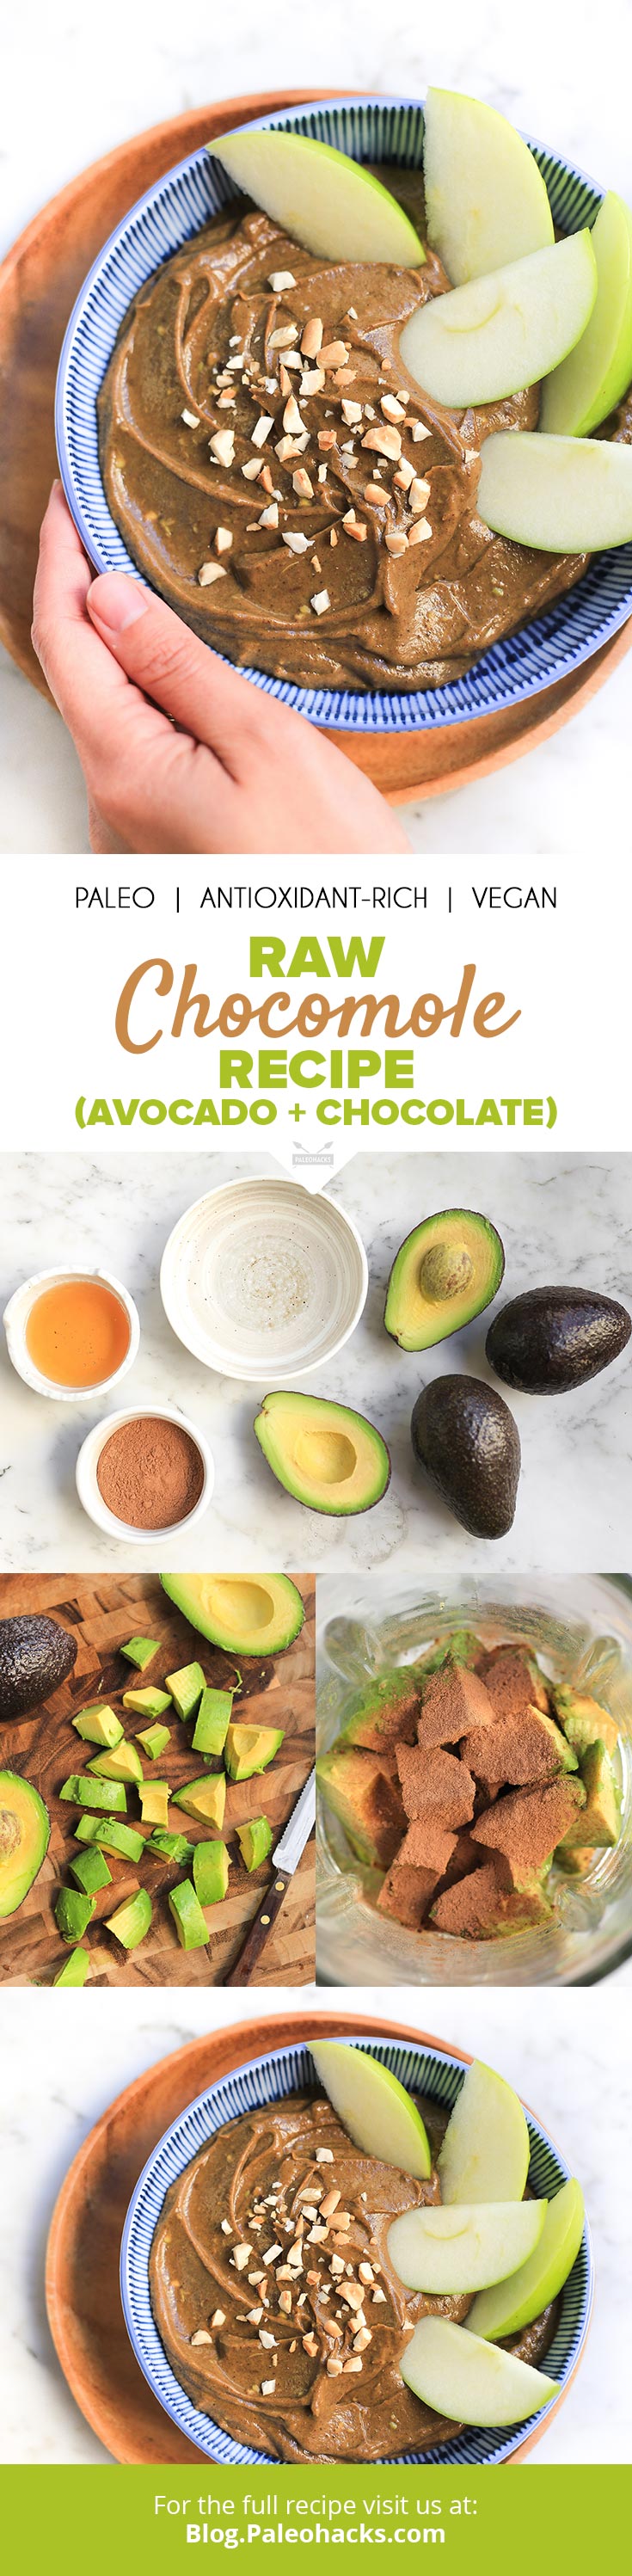 The love child of chocolate pudding and guacamole, this silky Chocomole hybrid makes for a tasty snack and a sweet dessert! 